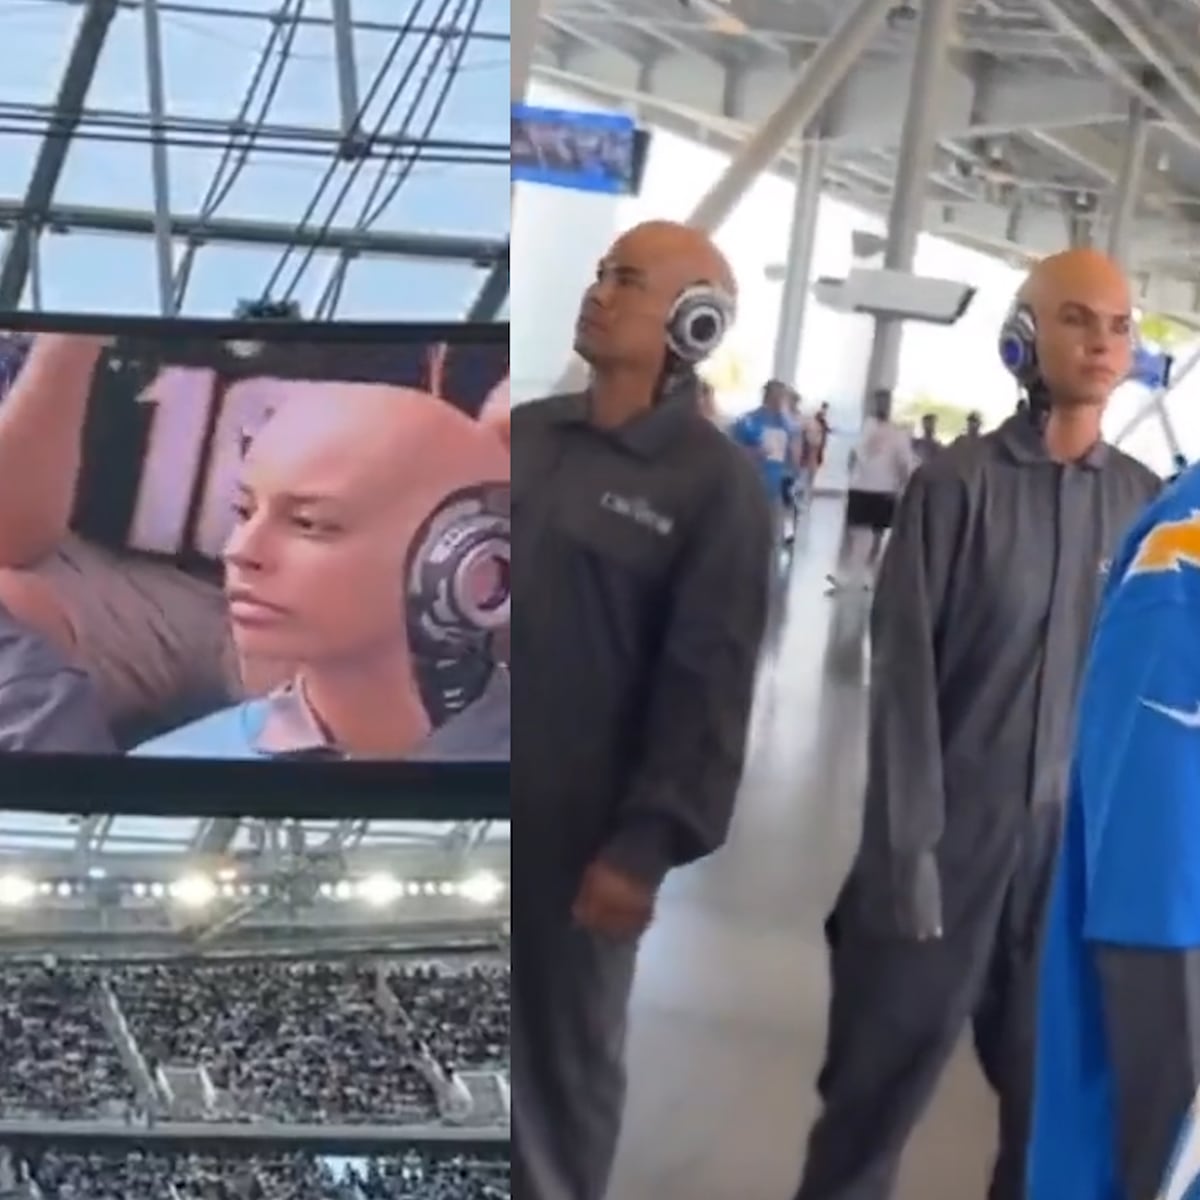 AI robot fans seen at Chargers-Dolphins game